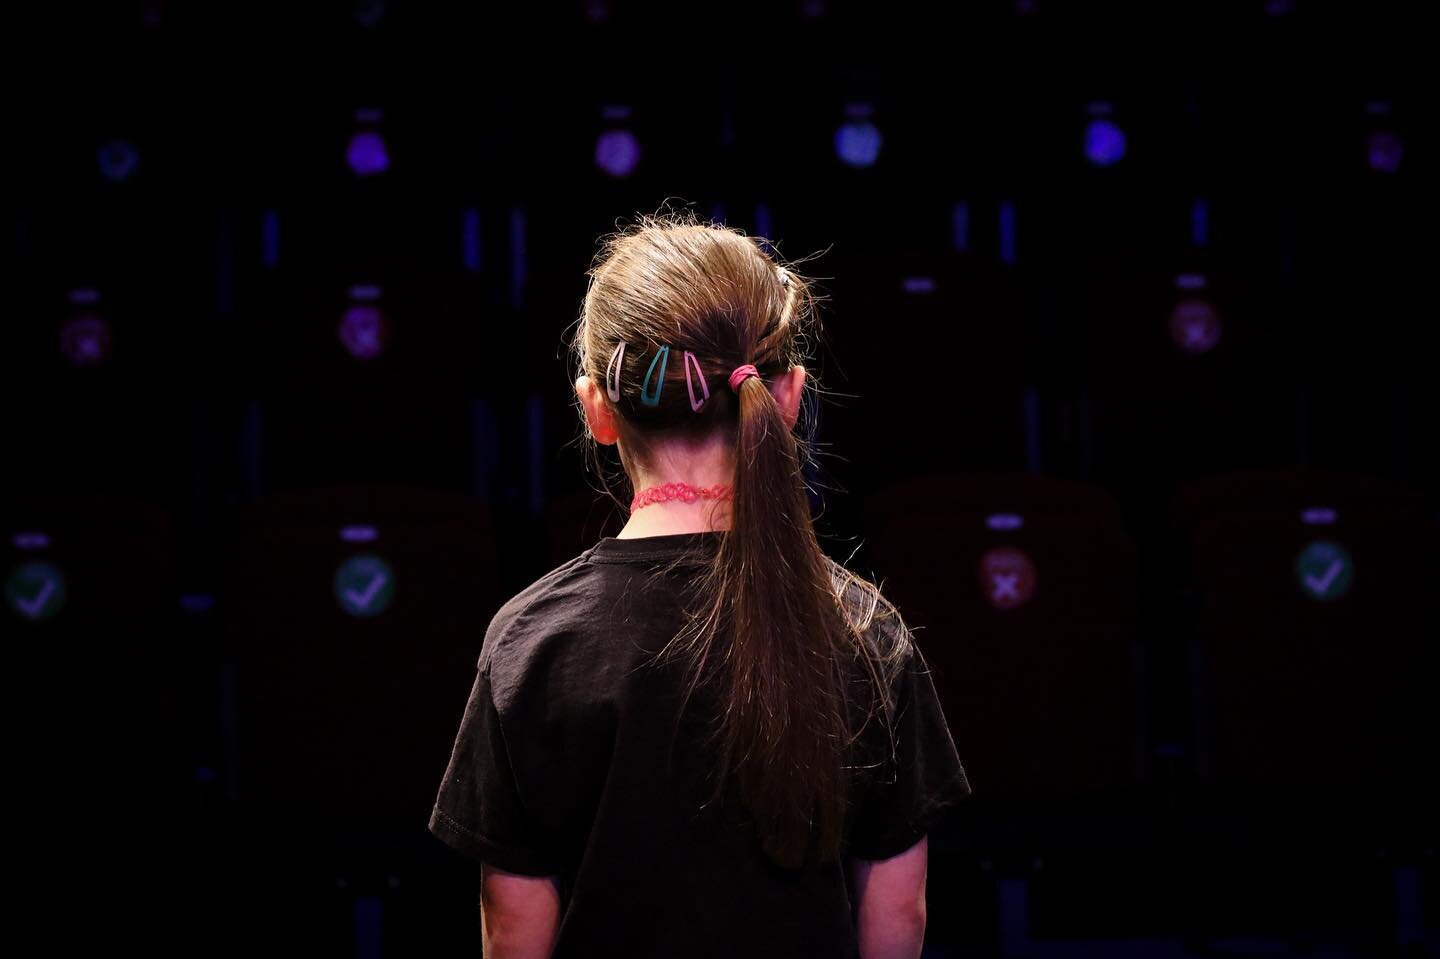 1 Week Until Matilda Auditions 📚

Calling all 'Revolting Children!'

Ages 5-18, perform in a musical this summer! 

The experience will include a week of rehearsals with West End professionals and trained teachers in our studios. A full musical thea